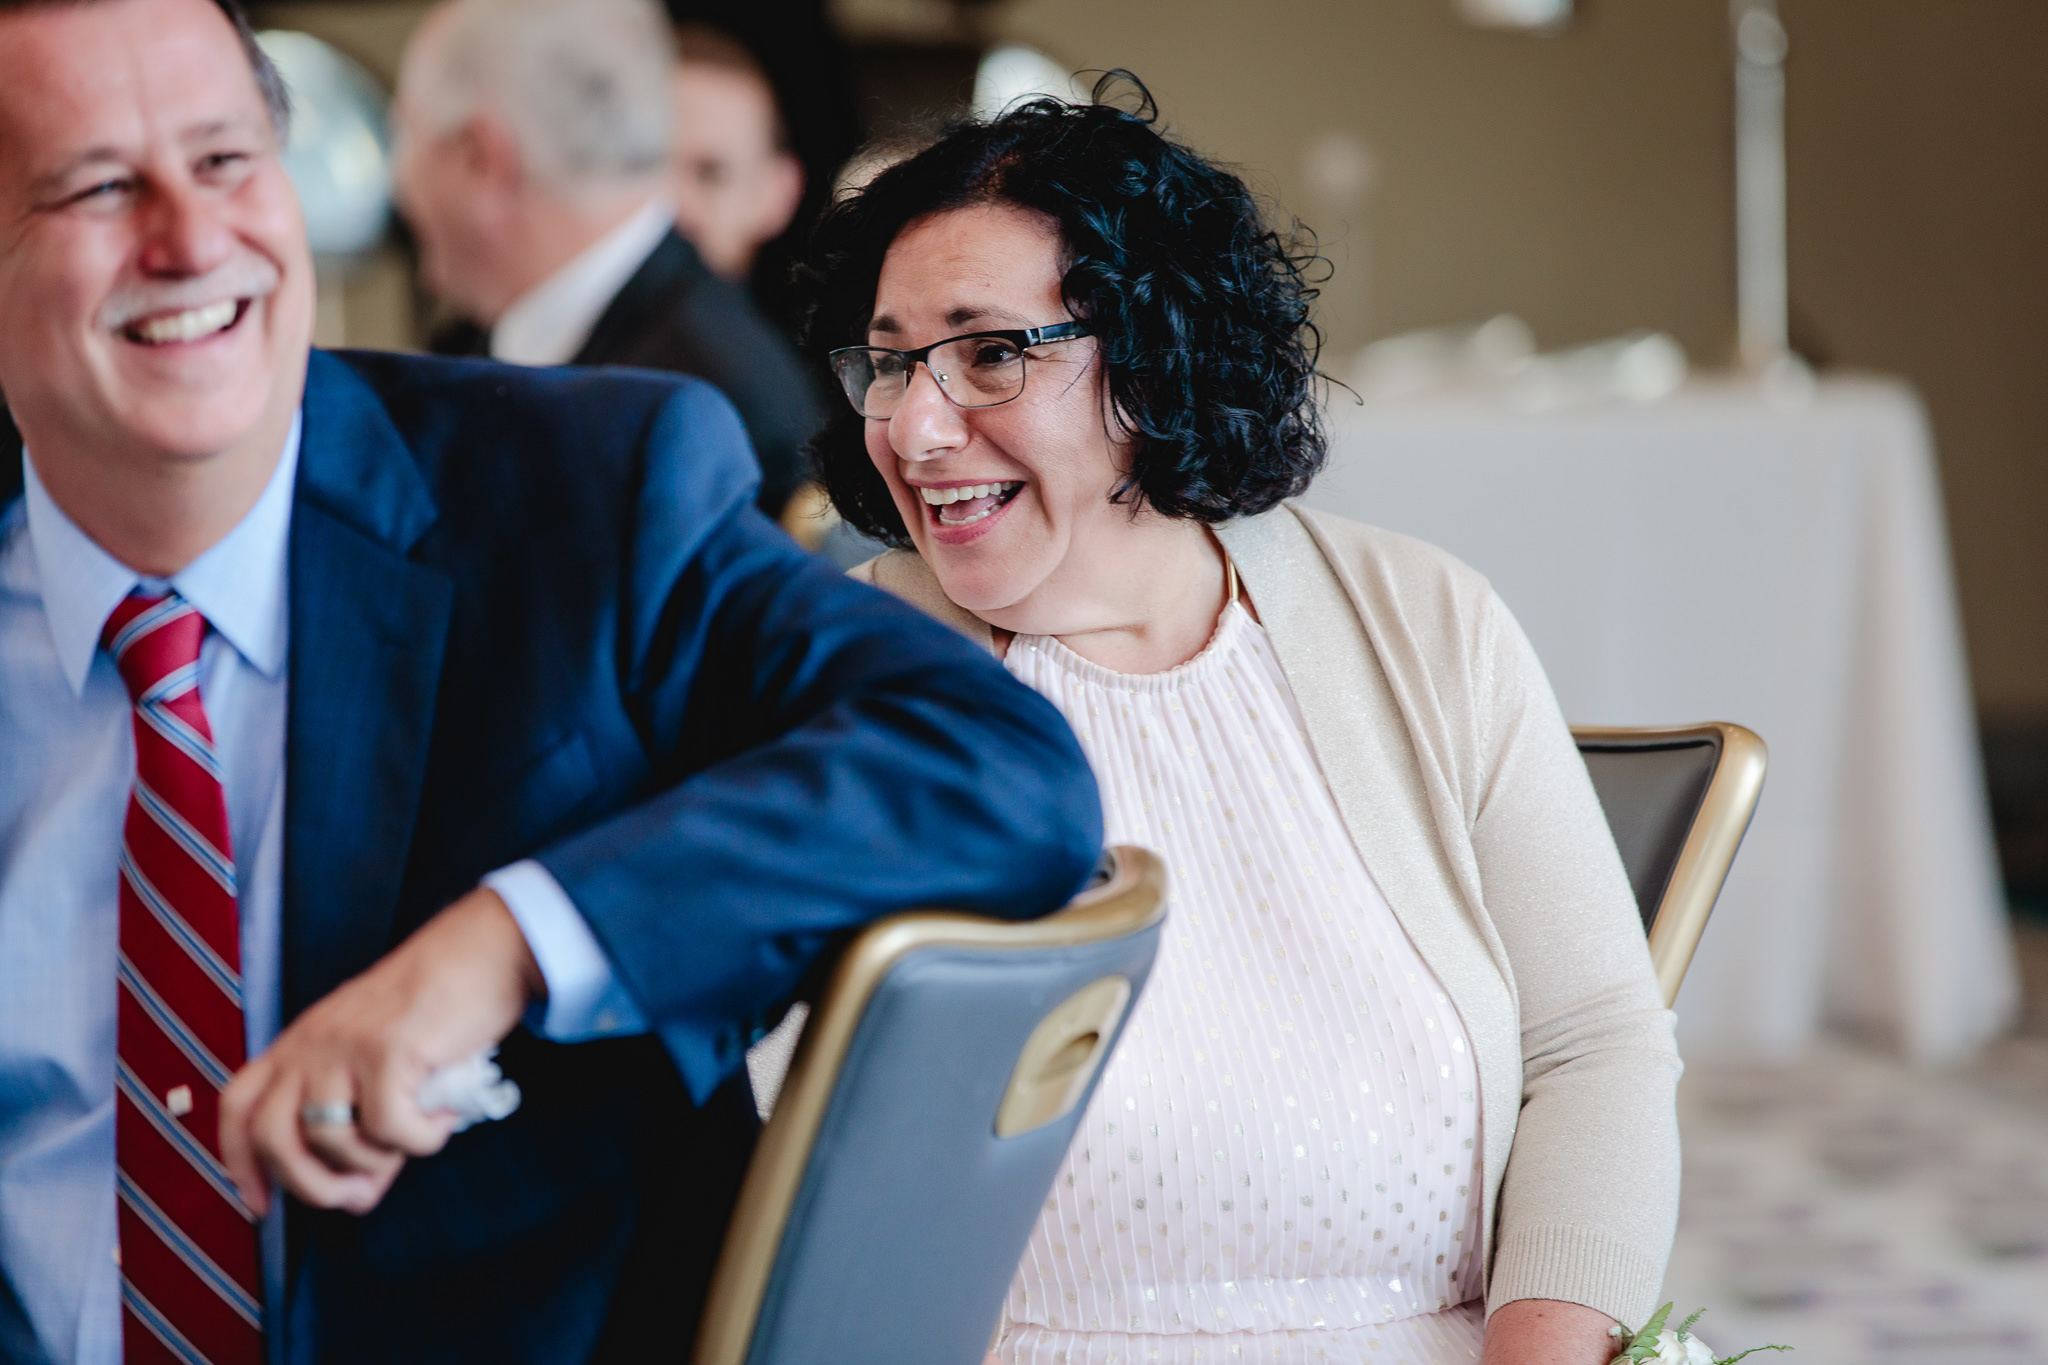 Mother of the groom laughs during speeches at a Duquesne University wedding